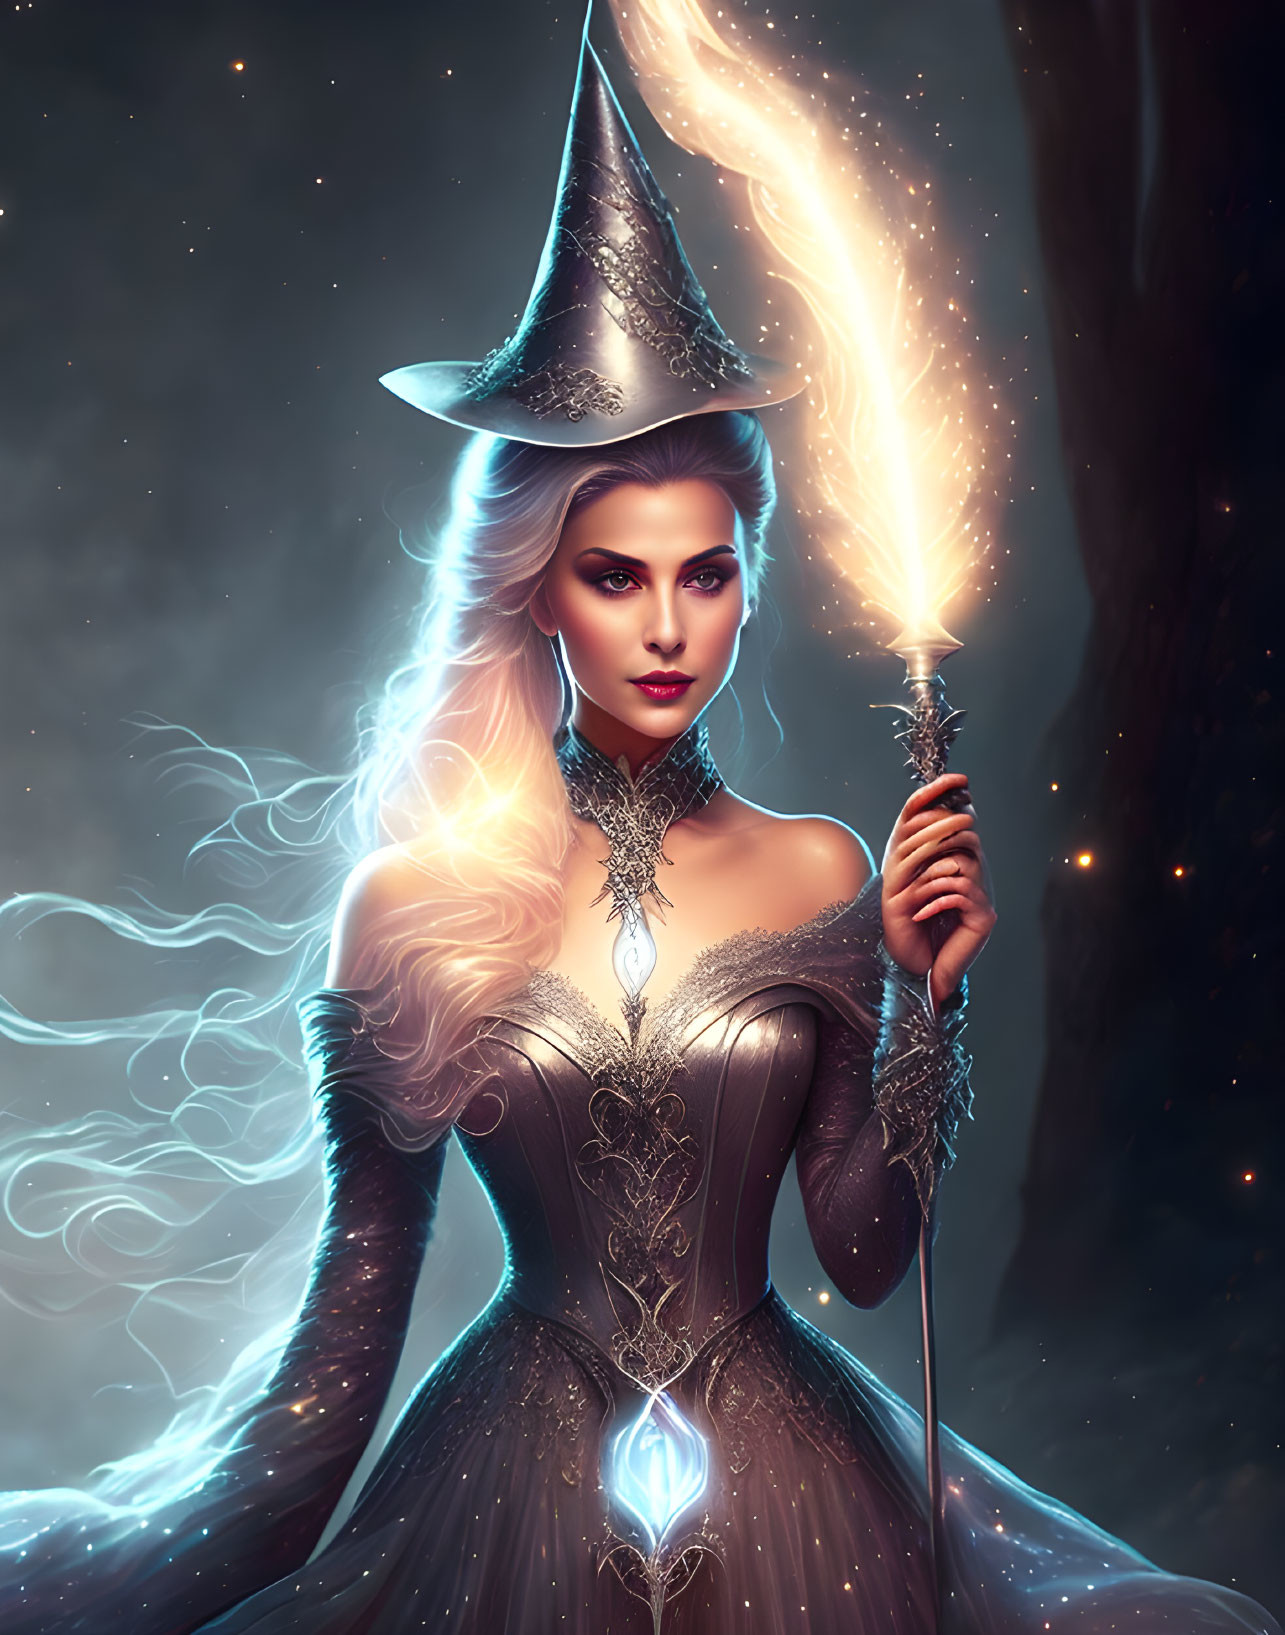 Mystical enchantress in glowing attire with luminous staff